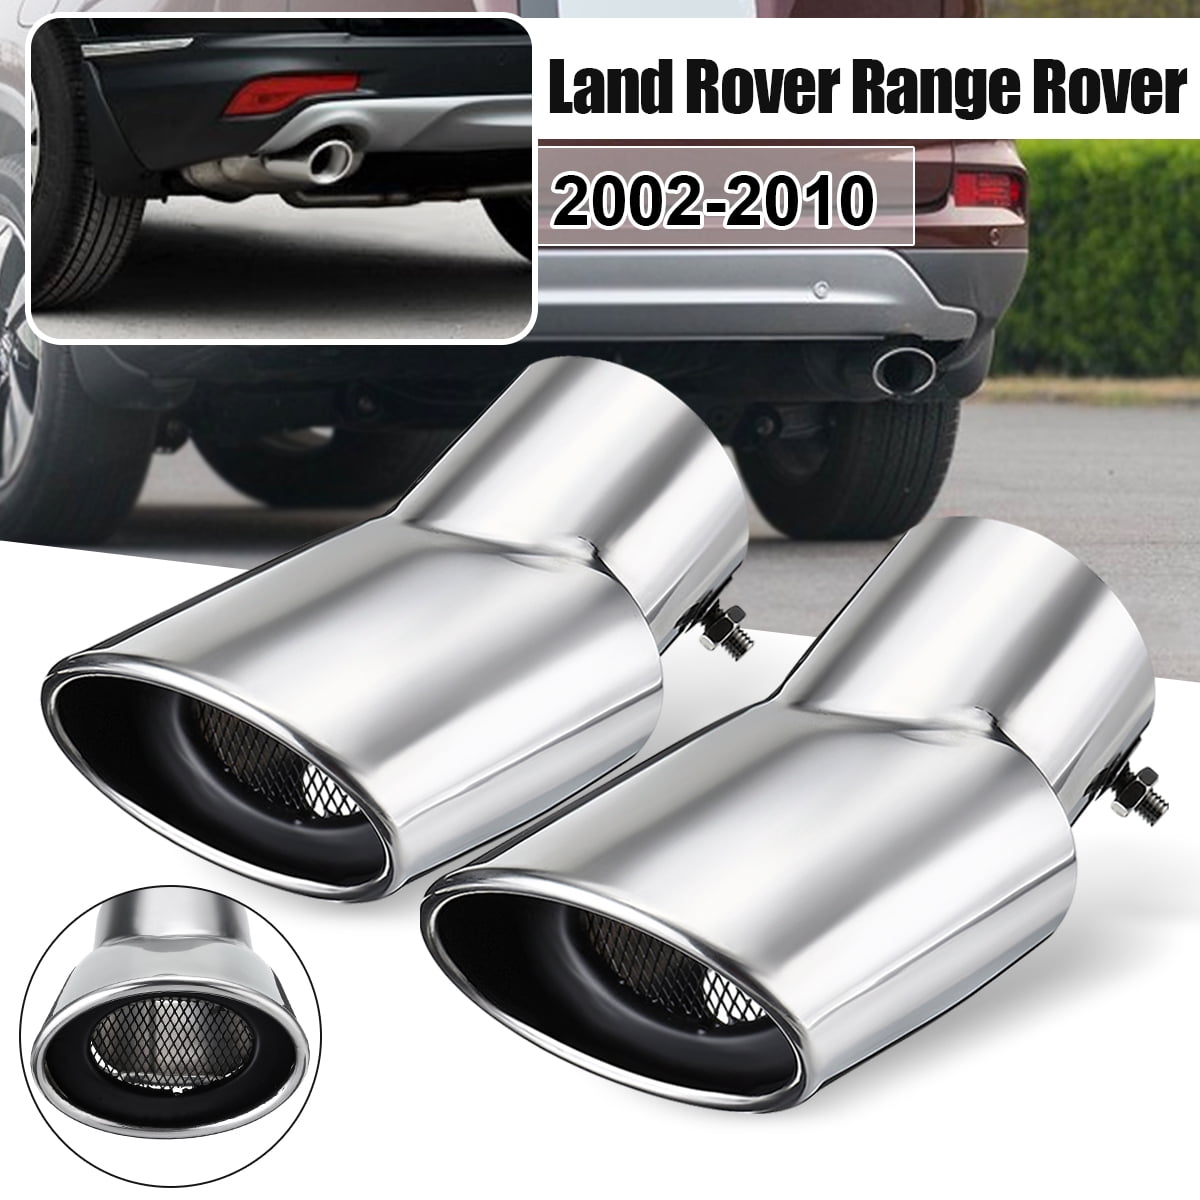 Chrome Exhaust Muffler Tail Pipe Tip Oval For Land Rover Range Rover